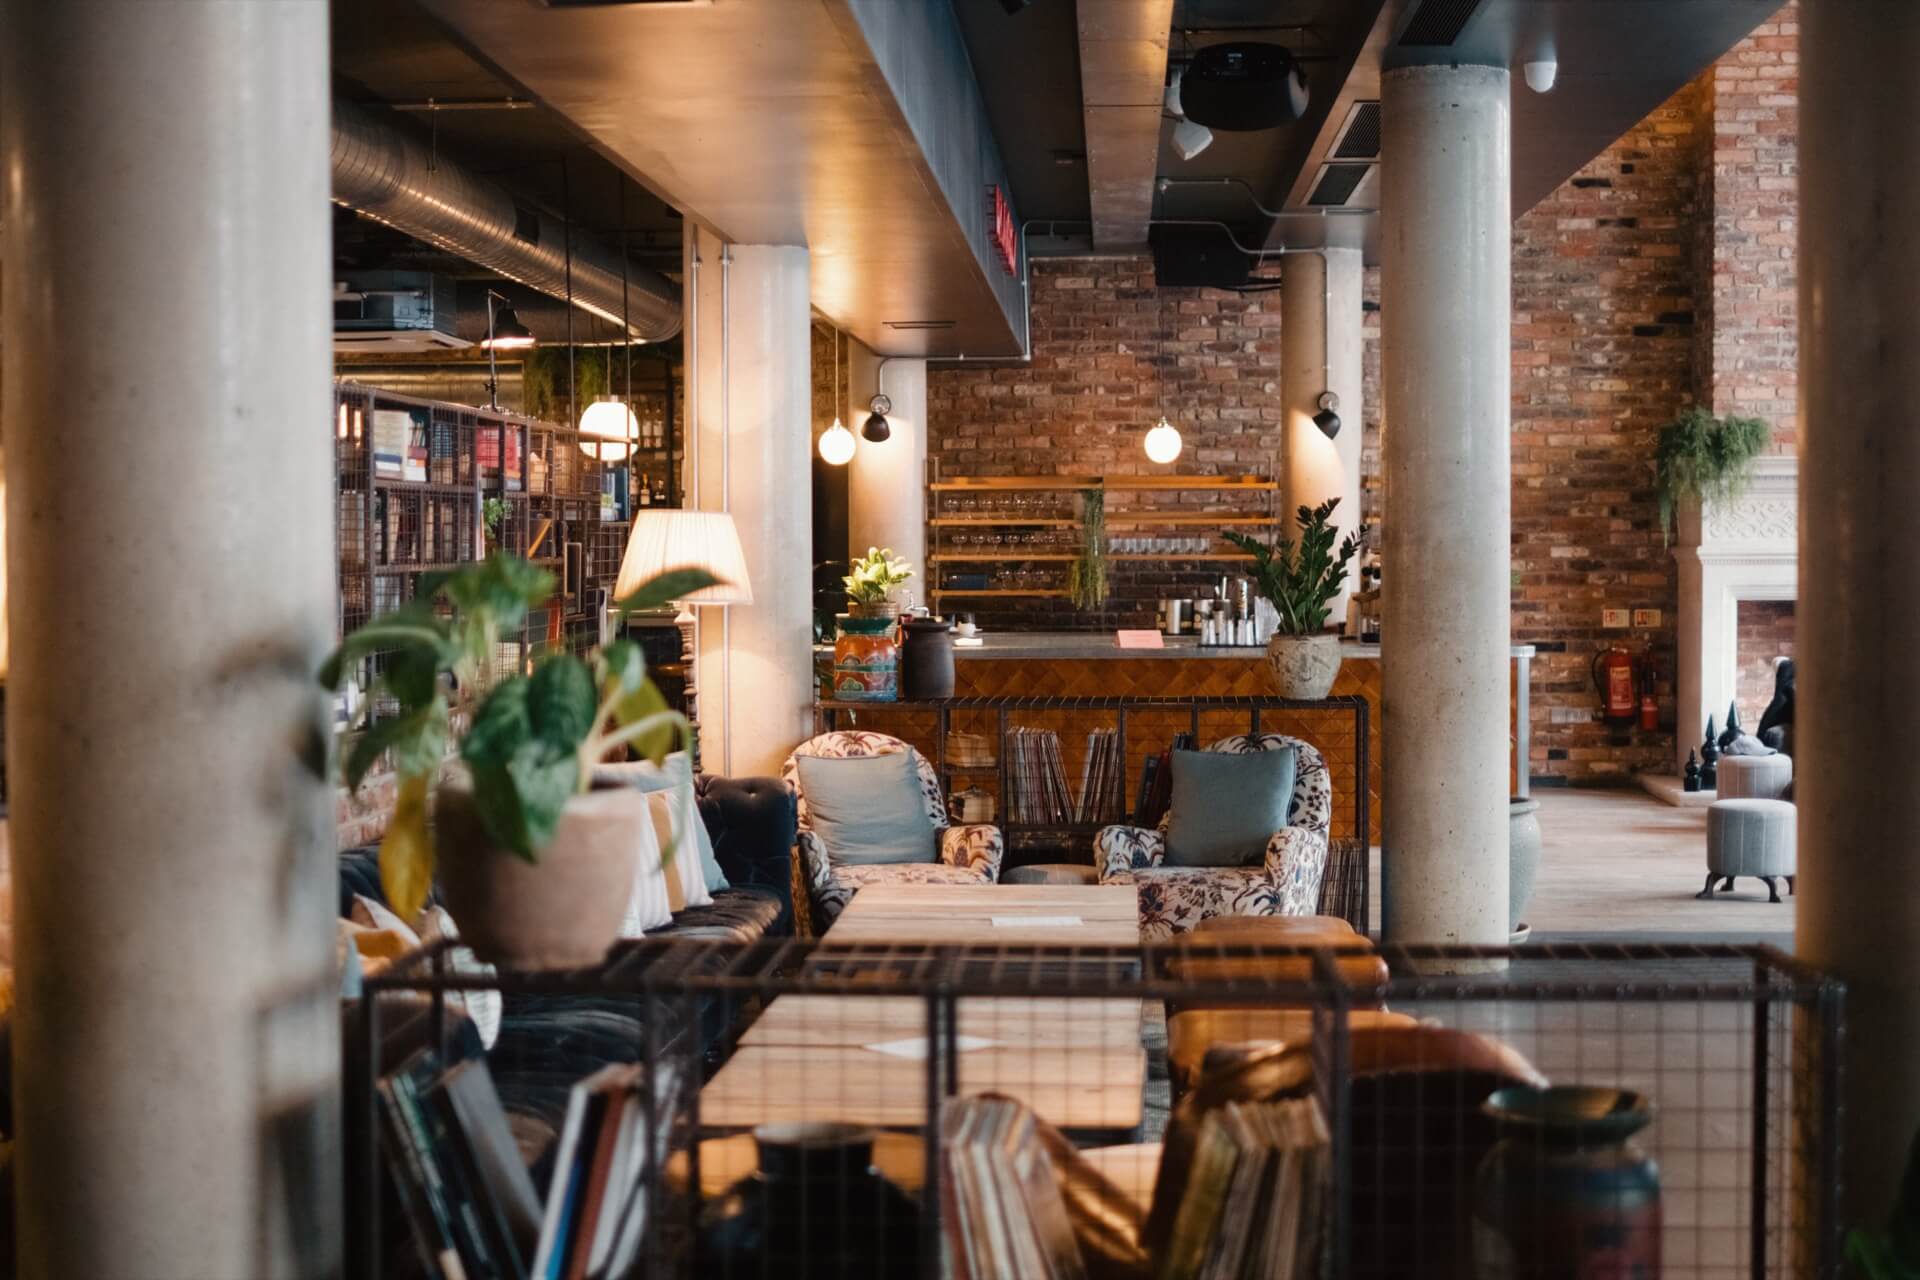 interior of The Hoxton in London's Shoreditch - a great place for free co-working